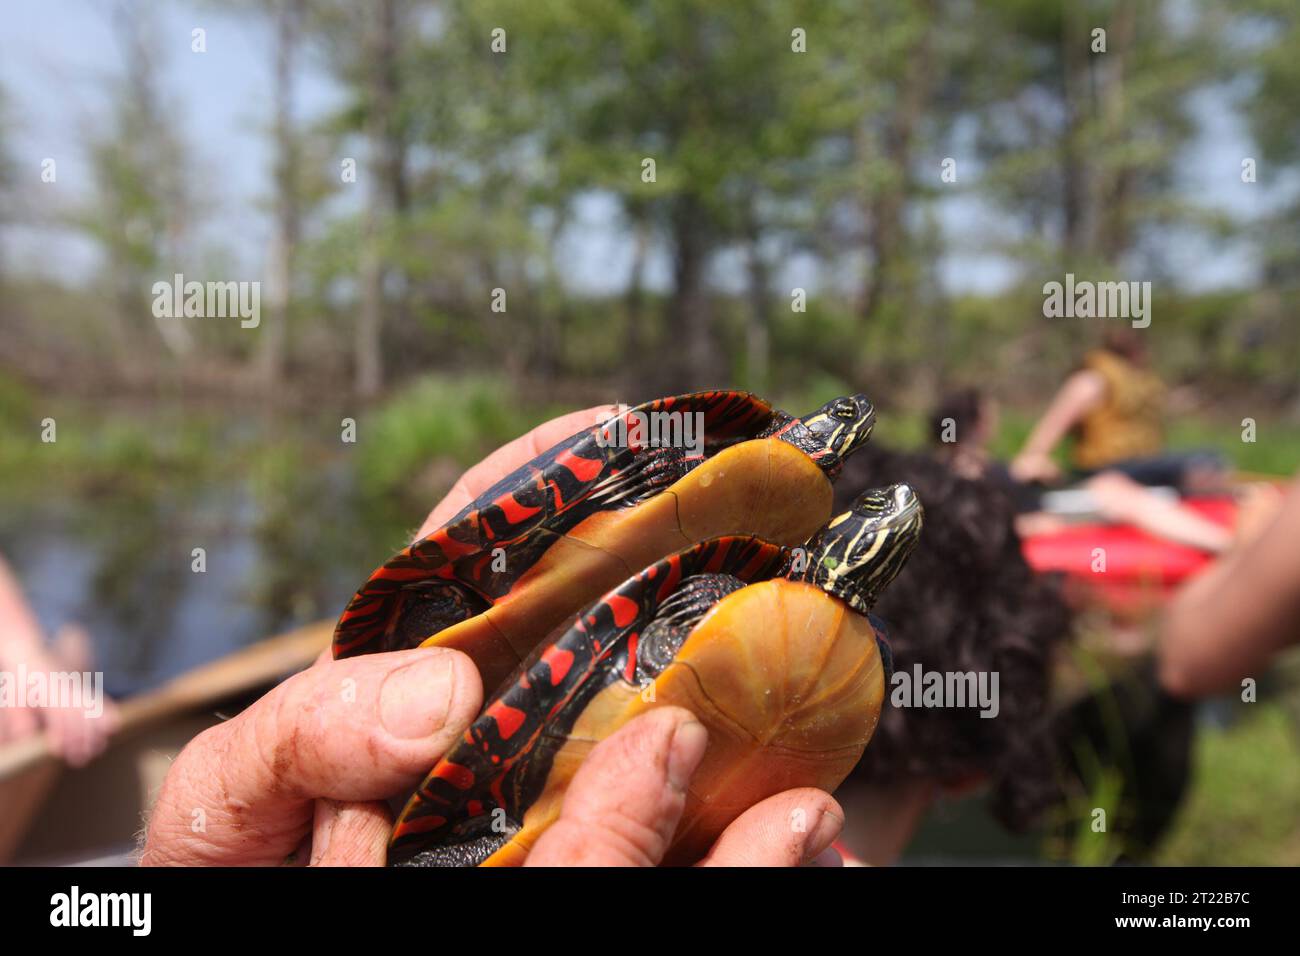 Two blanding's turtles getting ready to be released into the wild at Assabet River, MA. Subjects: Reptiles; Rivers and streams; Species of concern. Location: Massachusetts. Fish and Wildlife Service Site: ASSABET RIVER NATIONAL WILDLIFE REFUGE.  . 1998 - 2011. Stock Photo